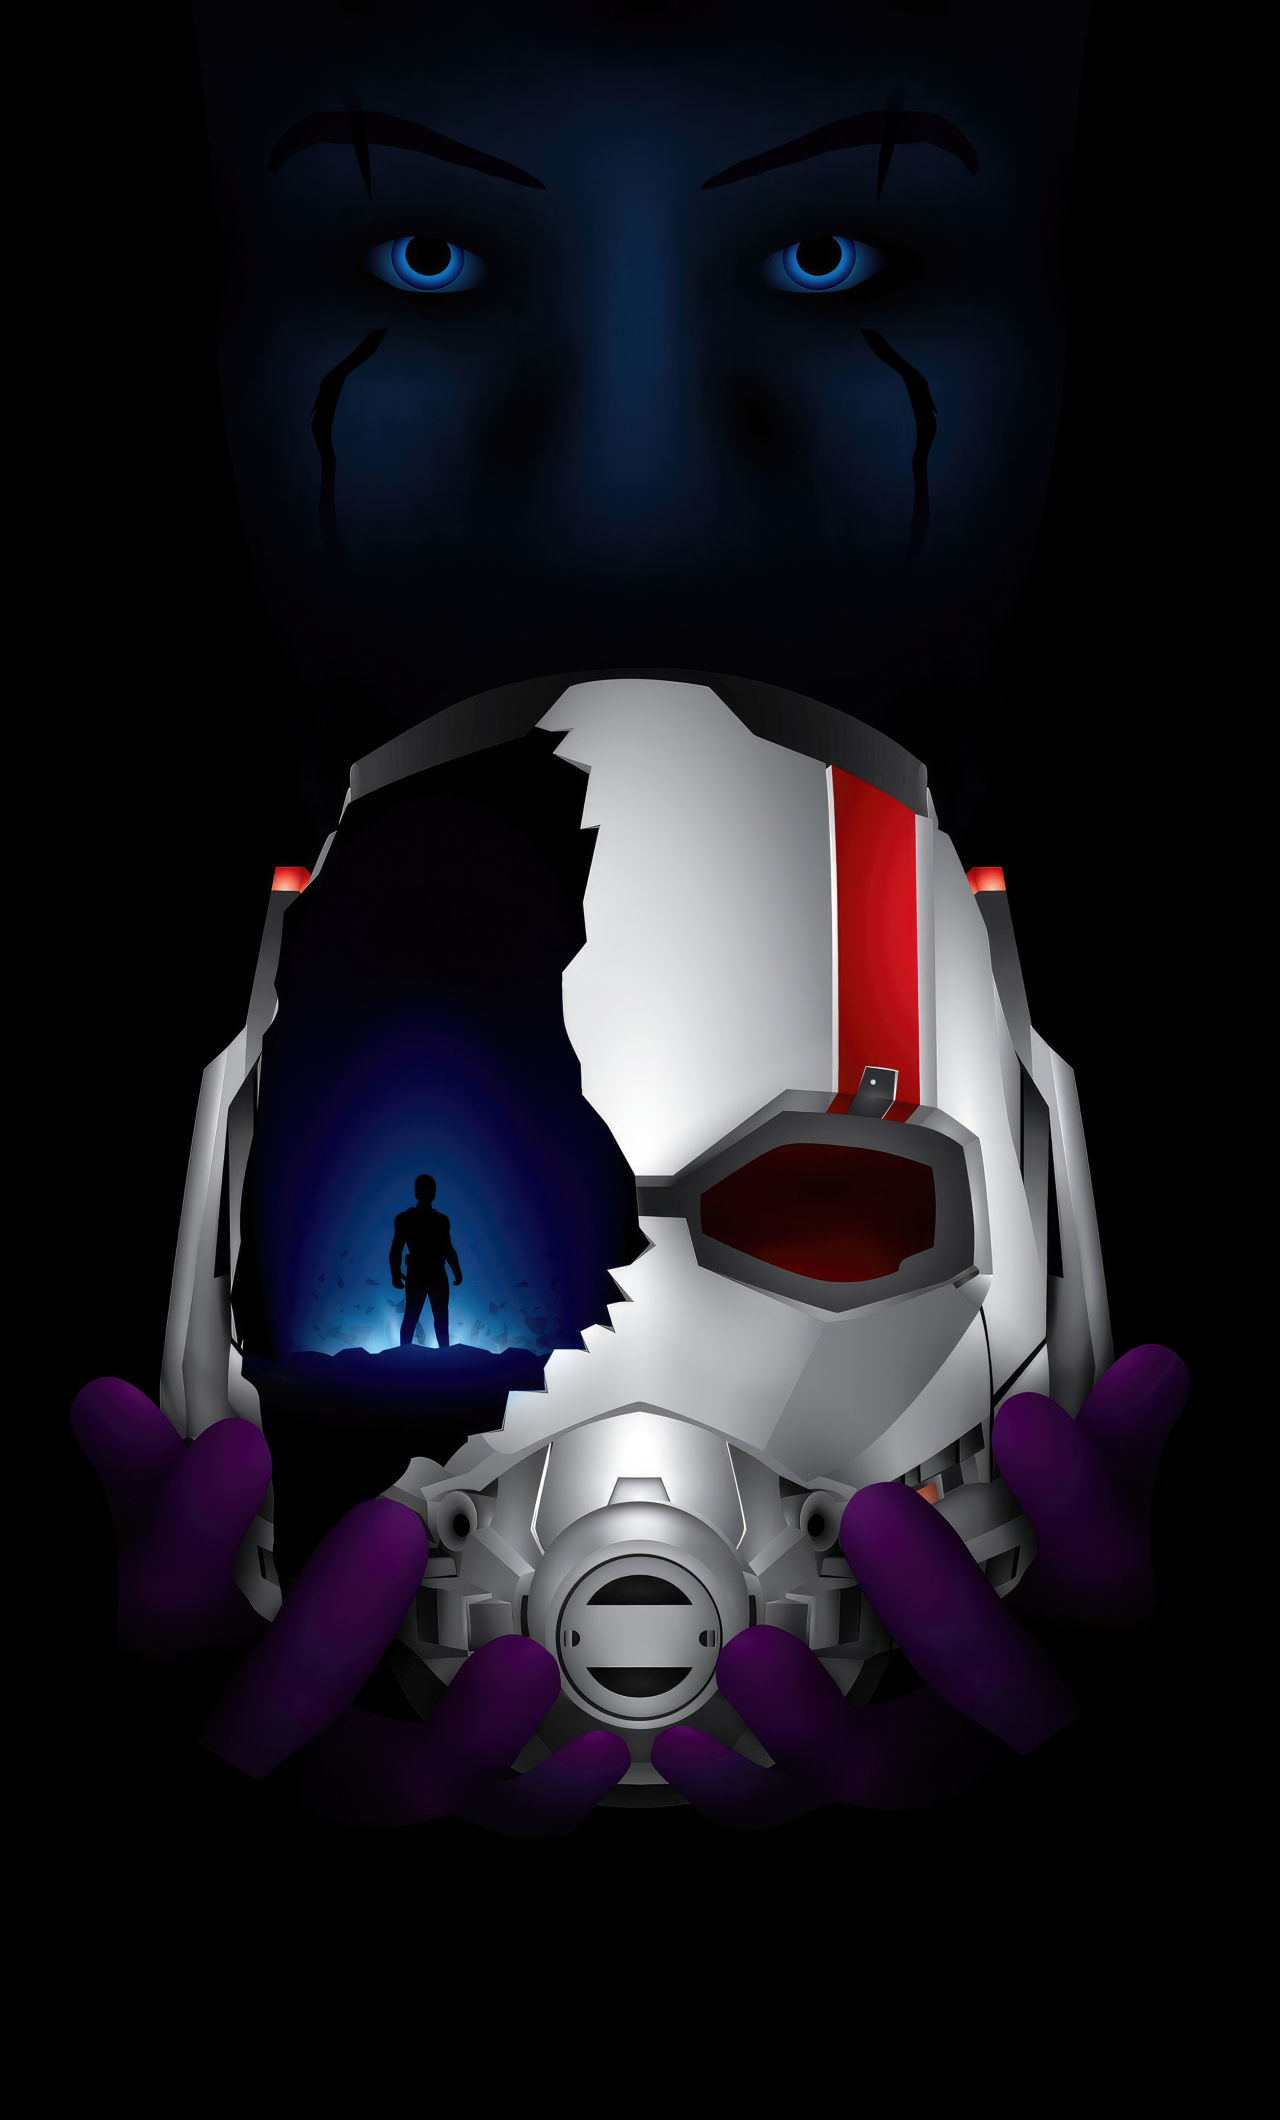 Antman Helmet and Kang the Conqueror, movie, dark poster, 1280x2120 wallpaper